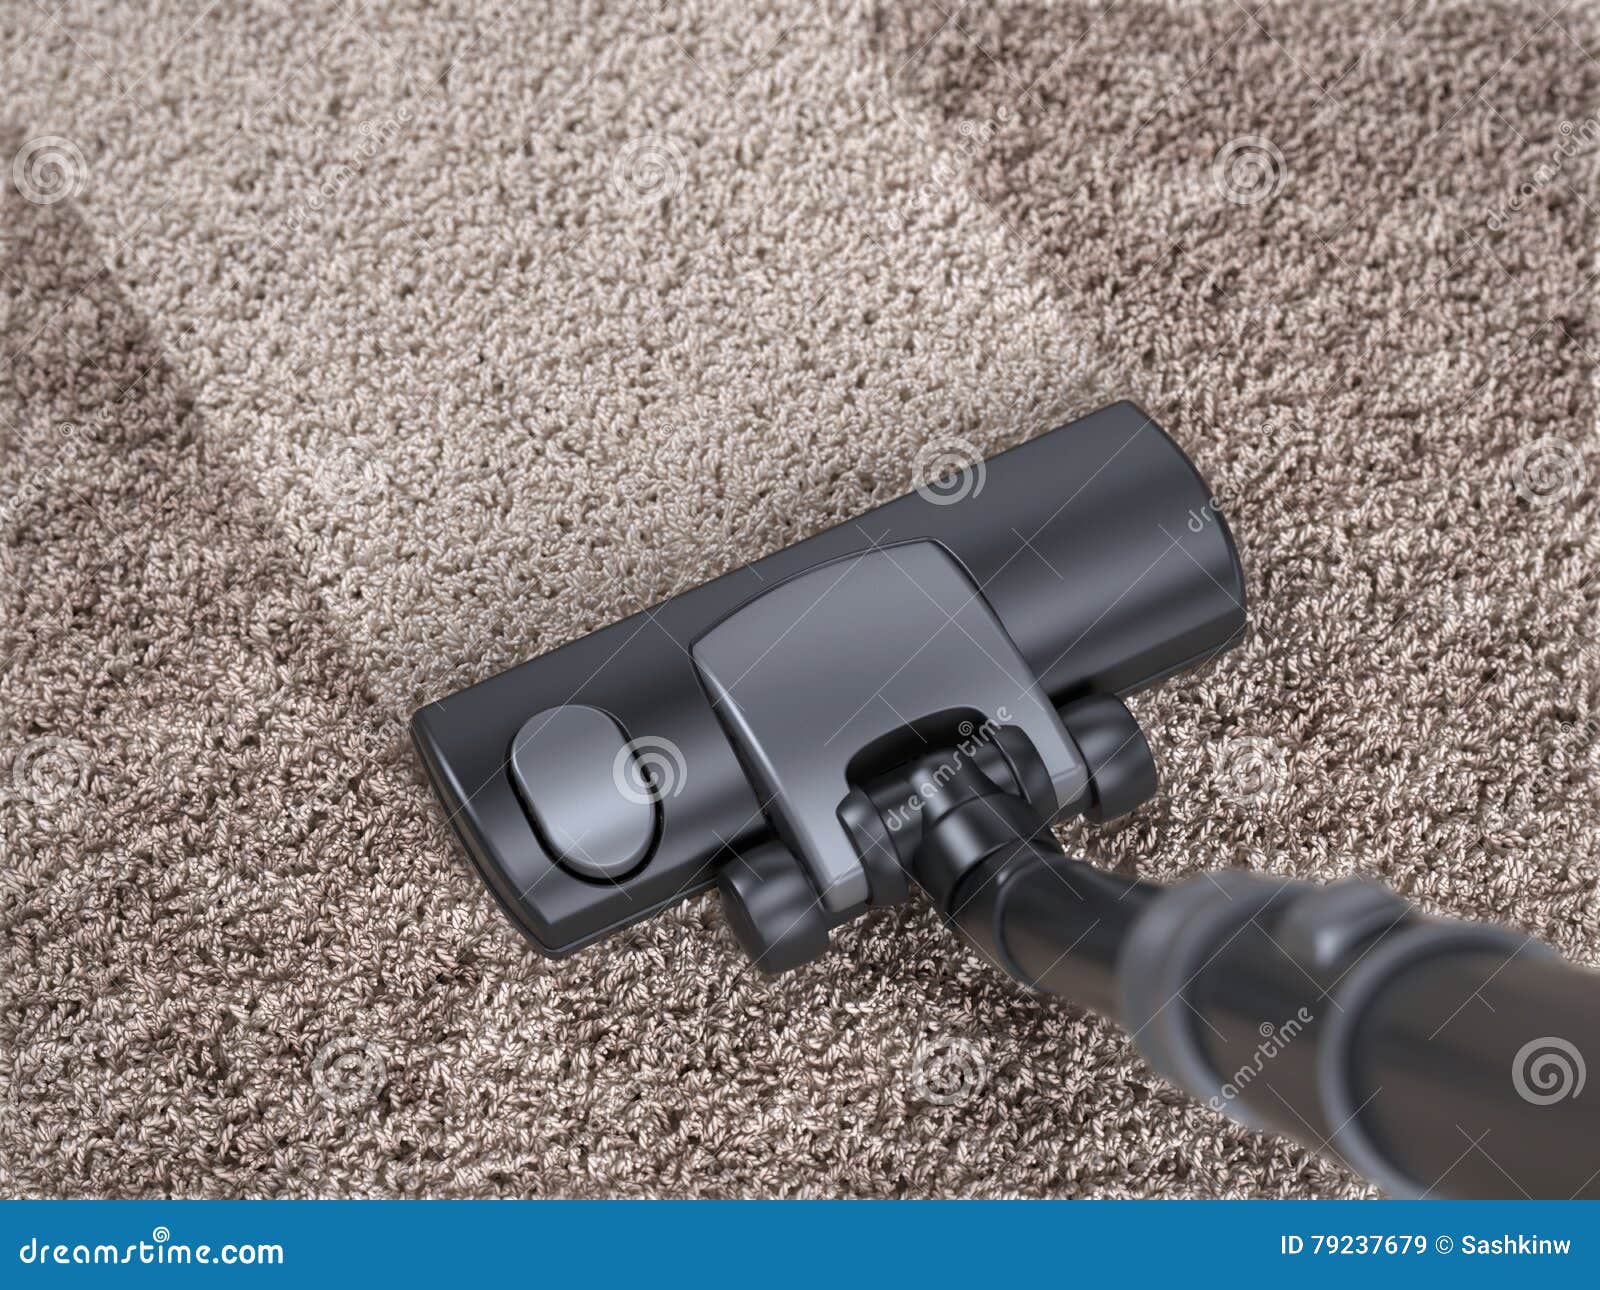 vacuum cleaner cleans dirty carpet - house cleaning concept